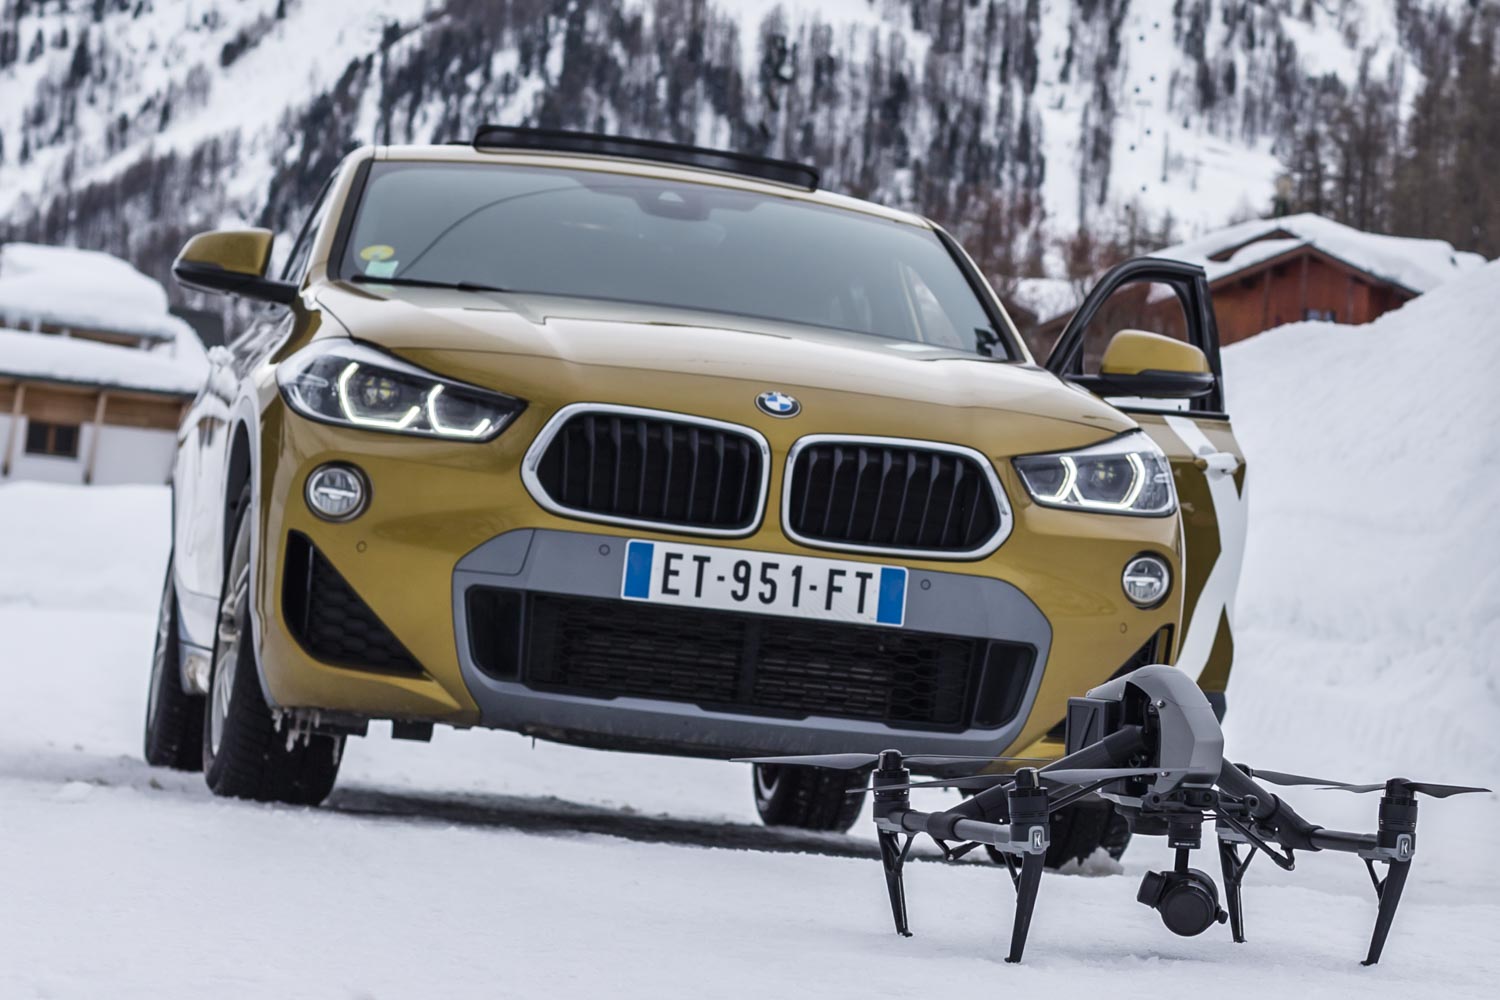 Bmw X2 - Drone - Dji Inspire 2 - Ice Driving - Val d'Isère